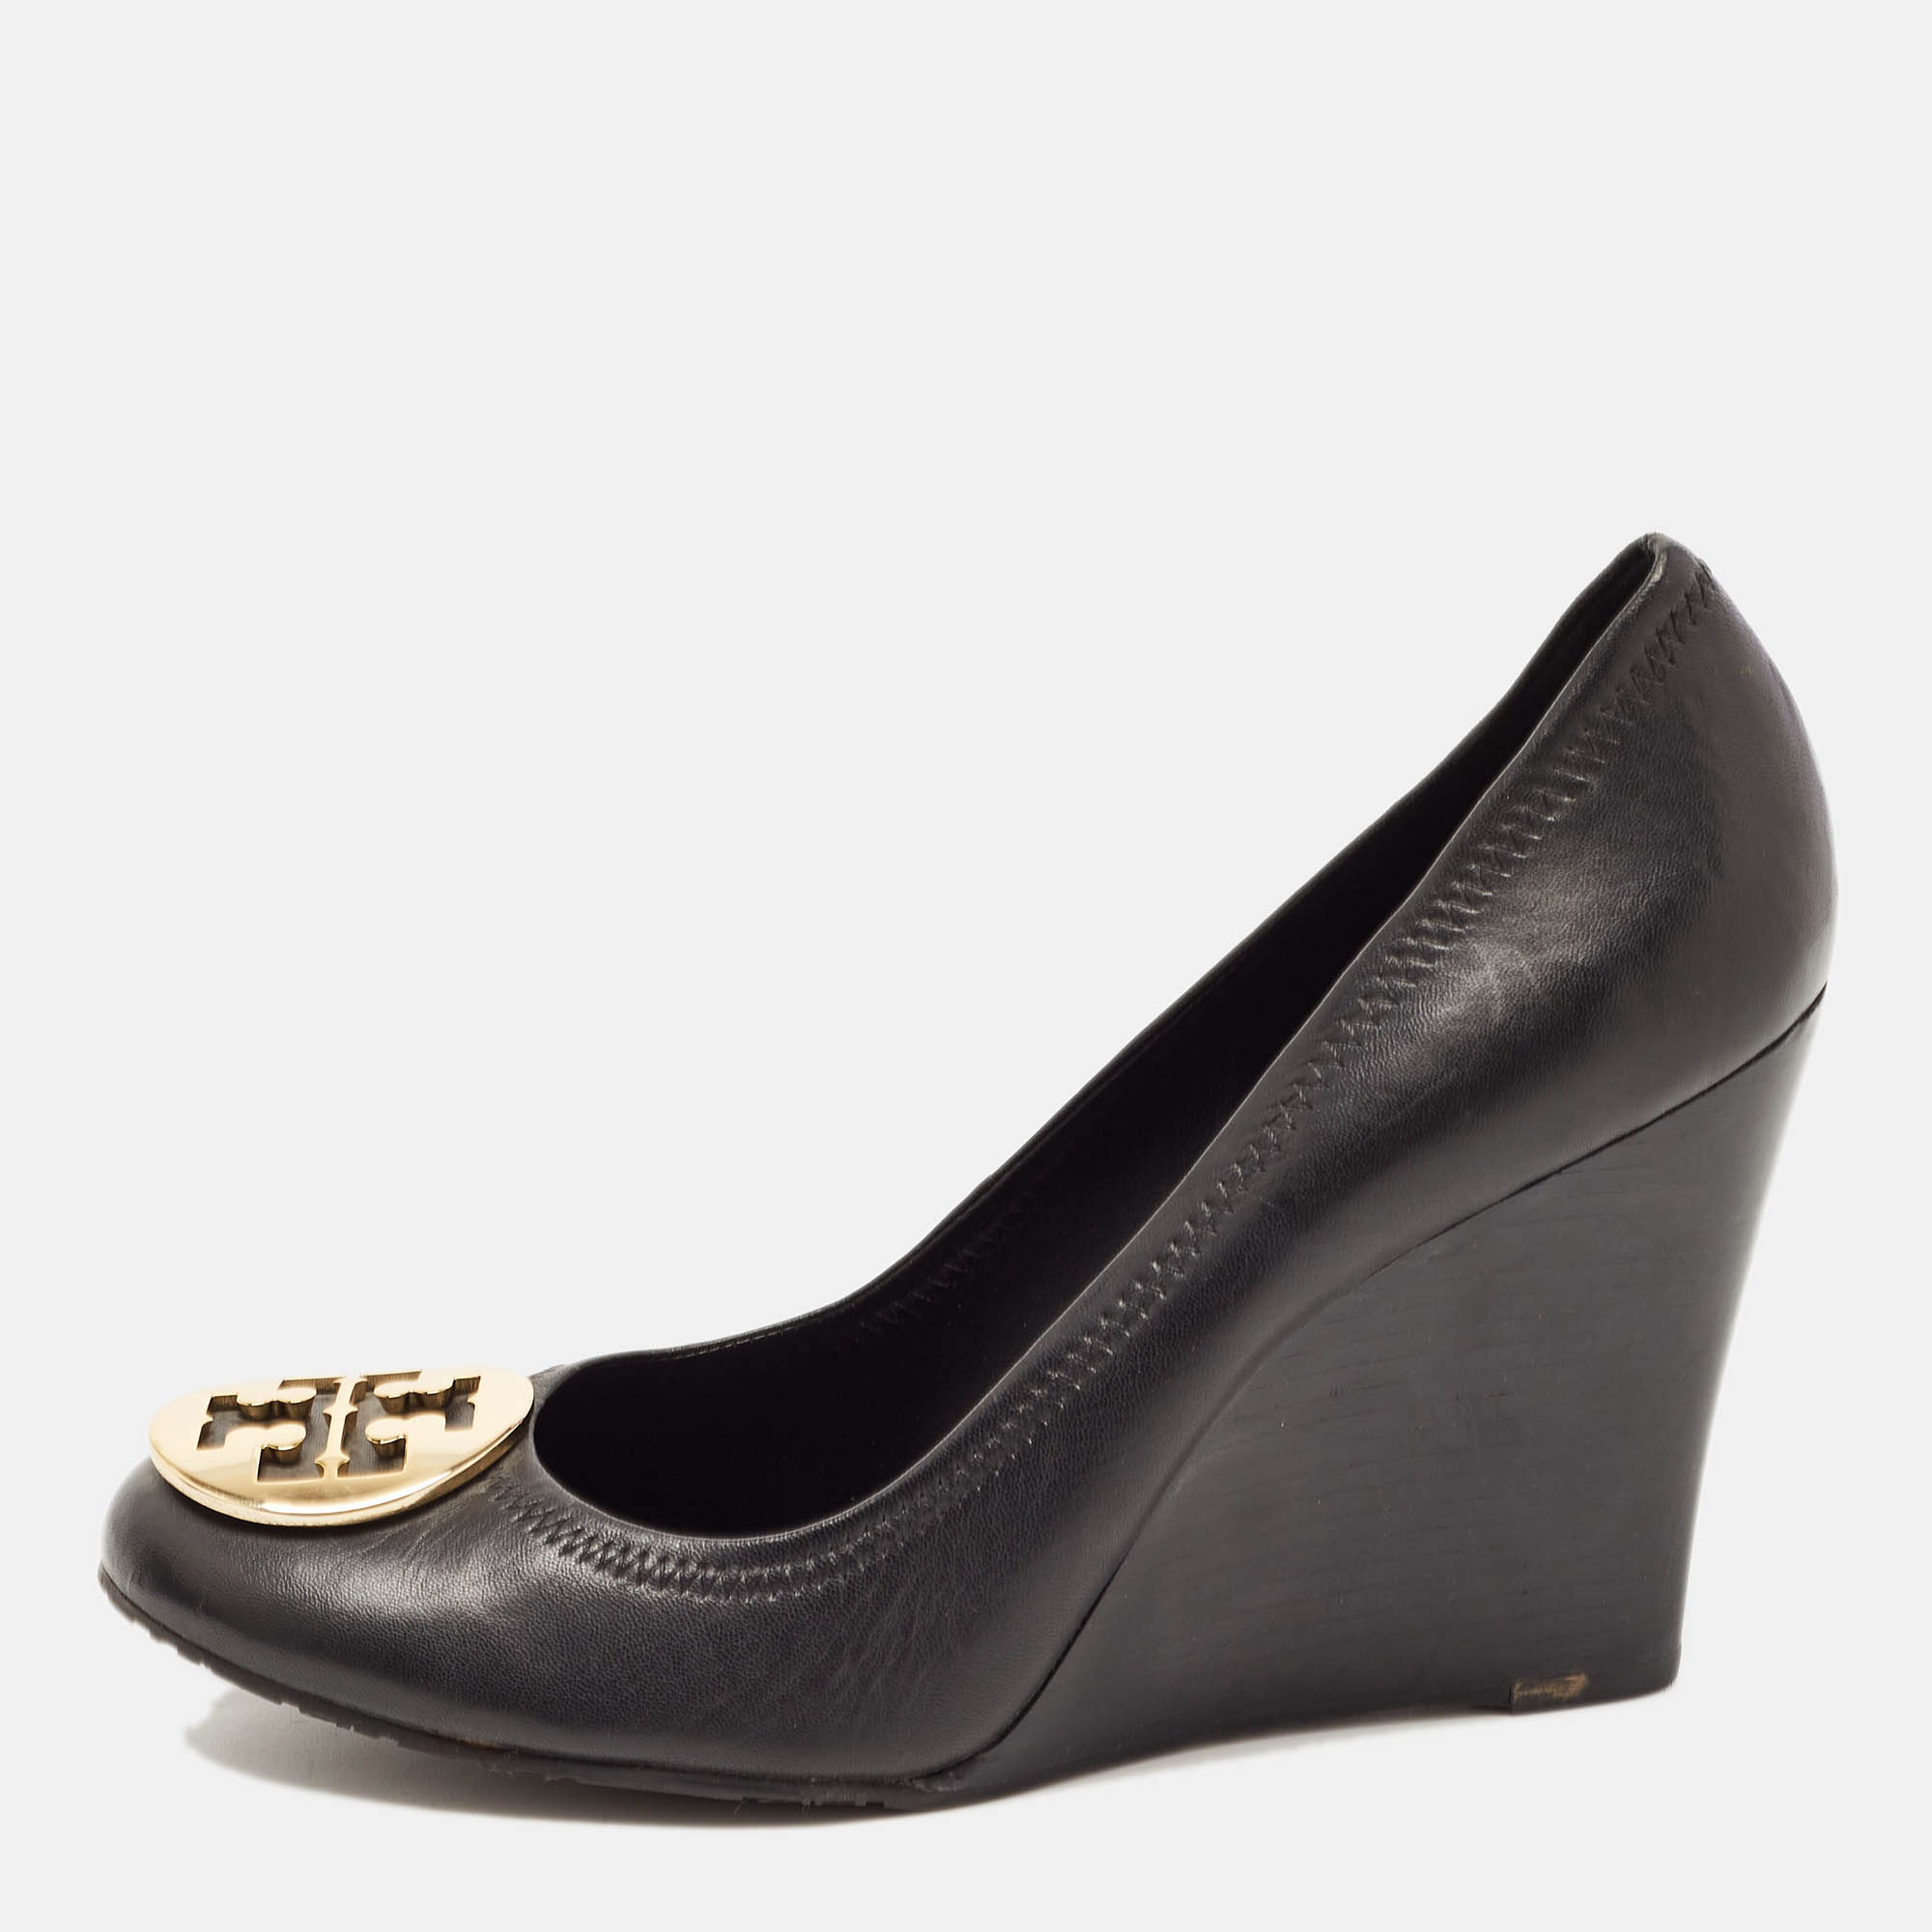 

Tory Burch Black Leather Chelsea Wedge Pumps Size